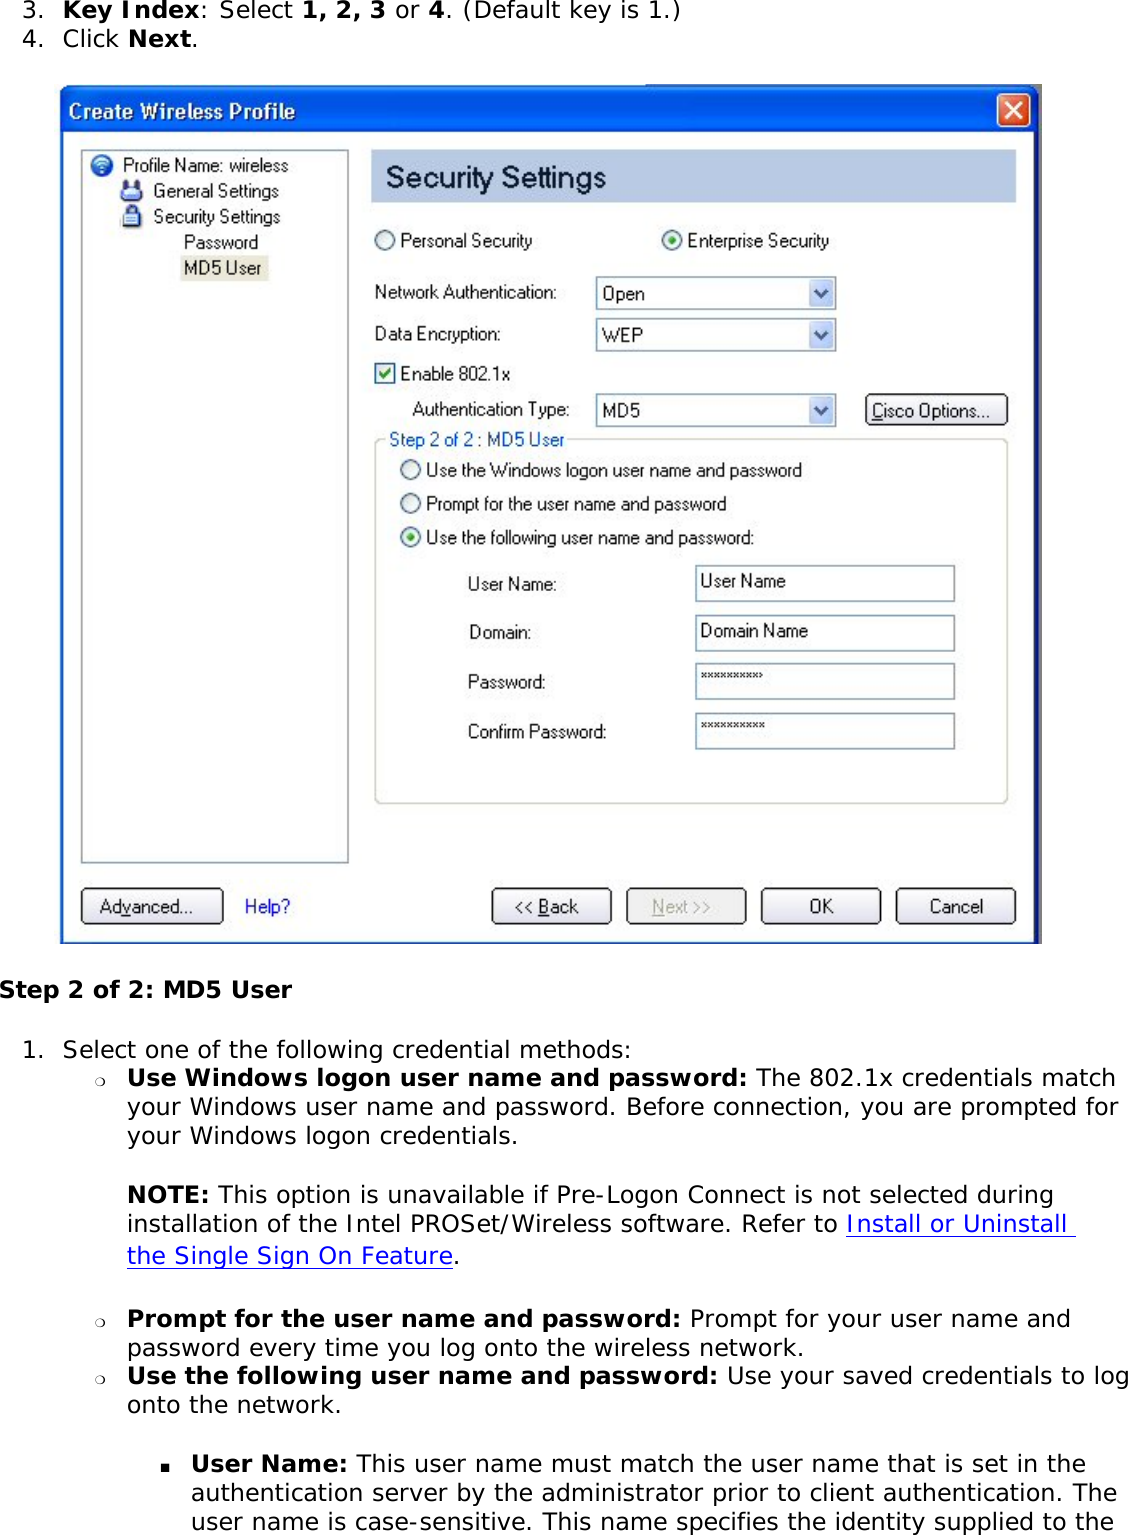 3.  Key Index: Select 1, 2, 3 or 4. (Default key is 1.)4.  Click Next.  Step 2 of 2: MD5 User 1.  Select one of the following credential methods: ❍     Use Windows logon user name and password: The 802.1x credentials match your Windows user name and password. Before connection, you are prompted for your Windows logon credentials. NOTE: This option is unavailable if Pre-Logon Connect is not selected during installation of the Intel PROSet/Wireless software. Refer to Install or Uninstall the Single Sign On Feature. ❍     Prompt for the user name and password: Prompt for your user name and password every time you log onto the wireless network. ❍     Use the following user name and password: Use your saved credentials to log onto the network. ■     User Name: This user name must match the user name that is set in the authentication server by the administrator prior to client authentication. The user name is case-sensitive. This name specifies the identity supplied to the 